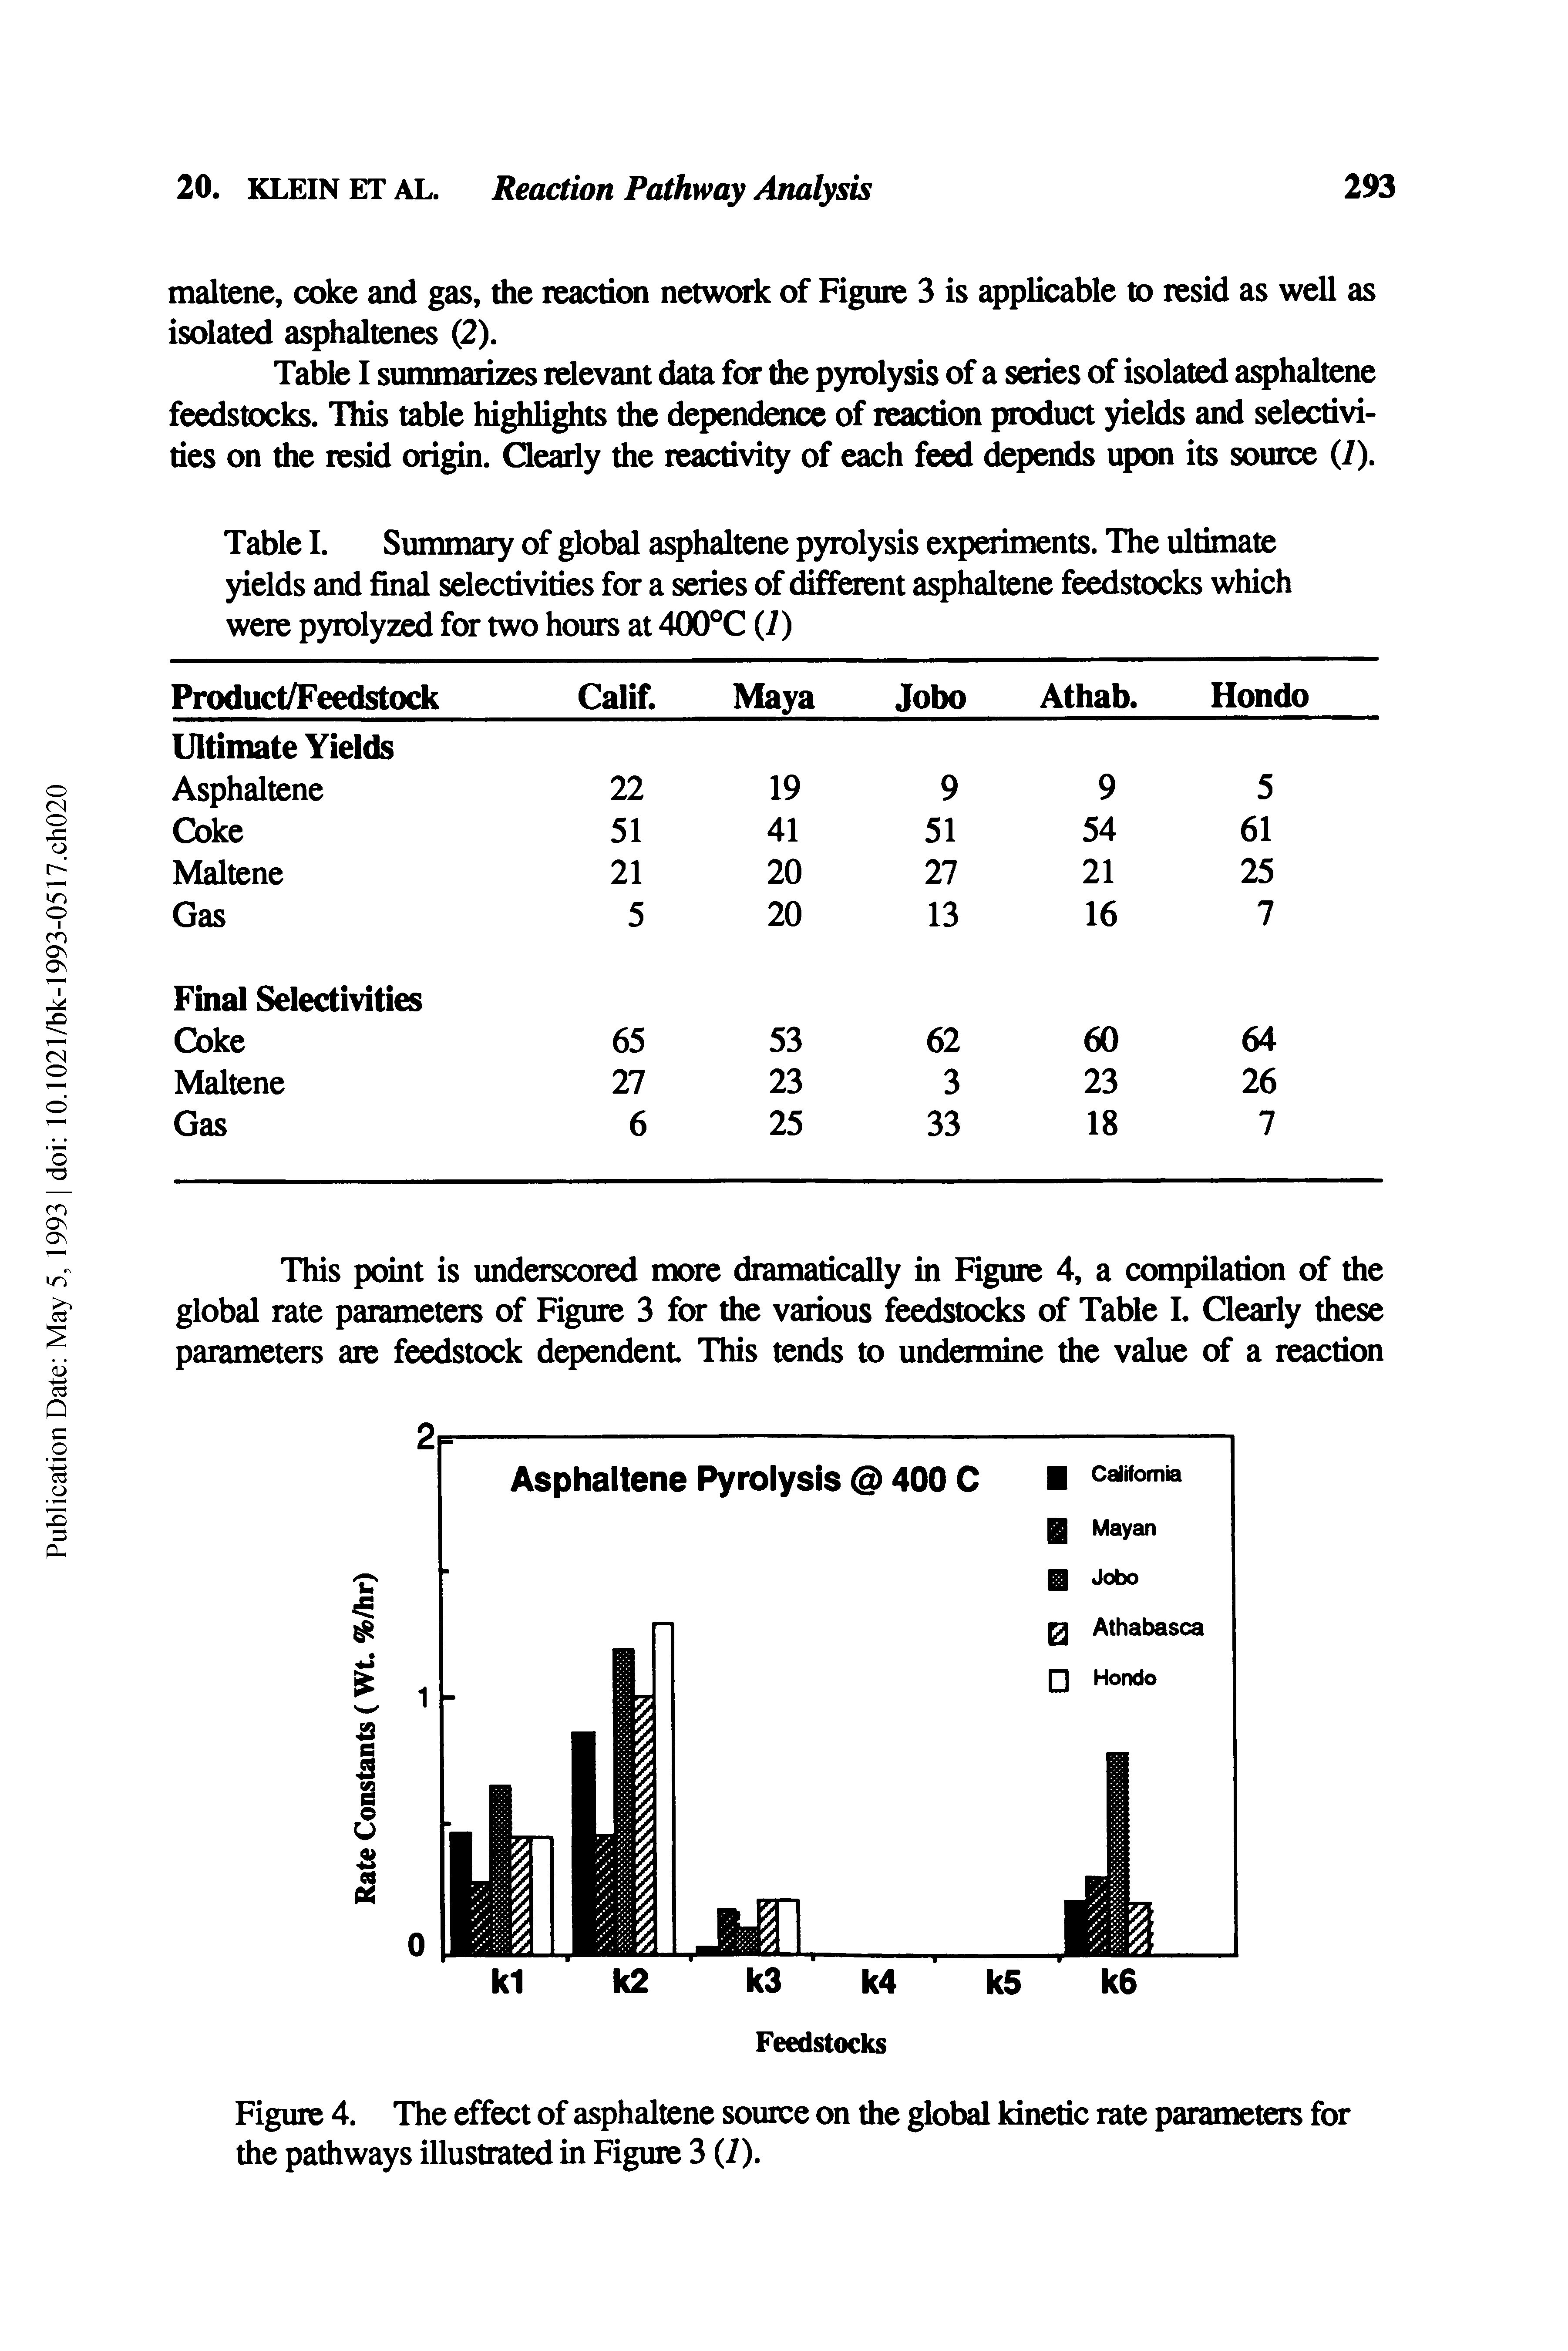 Figure 4. The effect of asphaltene source on the global kinetic rate parameters for the pathways illustrated in Figure 3 (7).